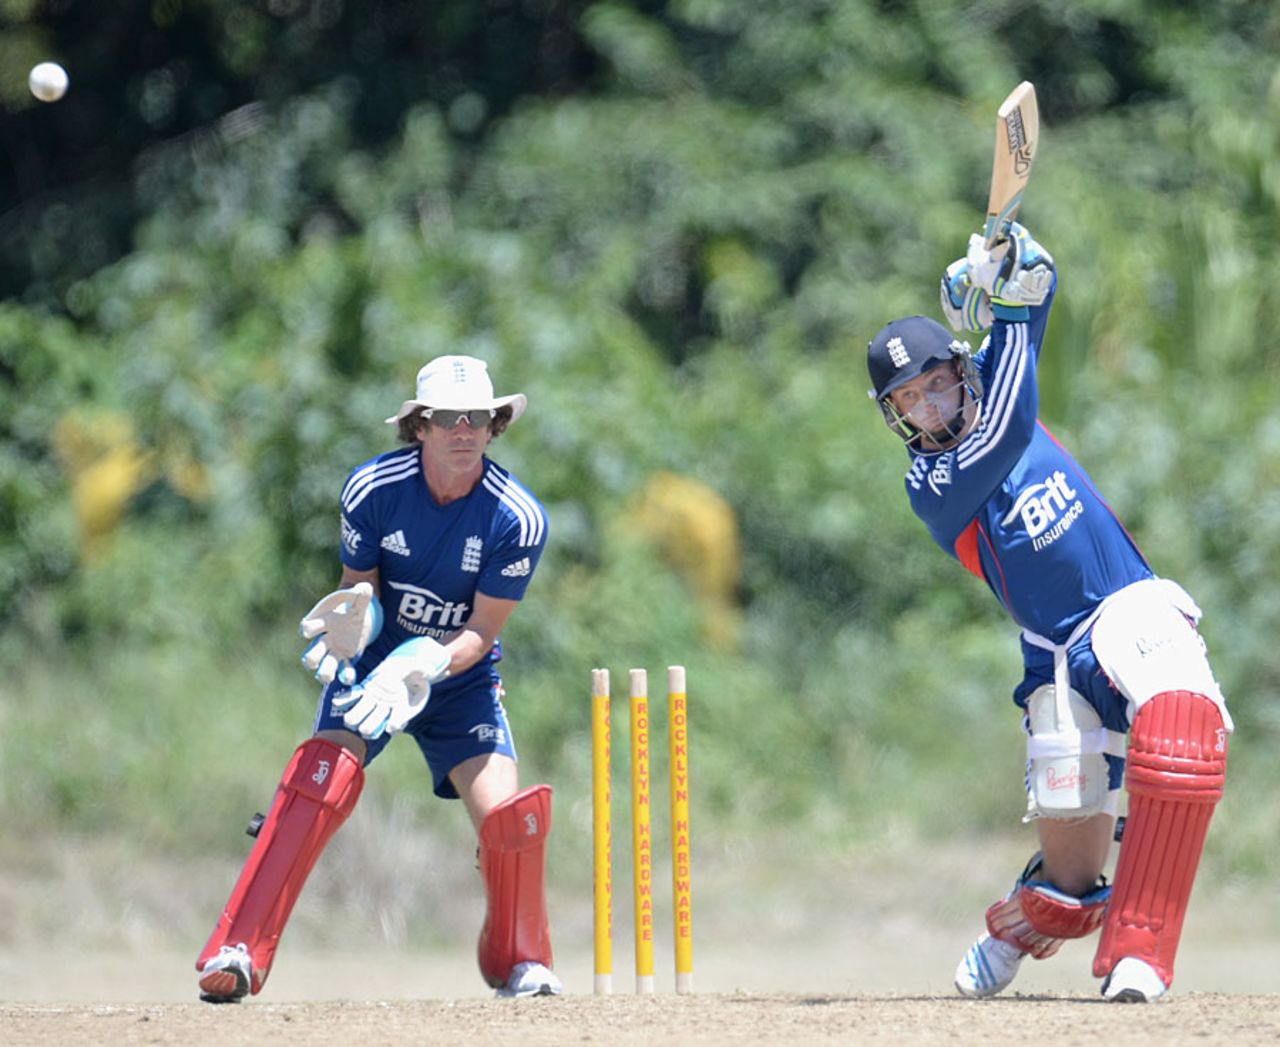 Bruce French gets back behind the stumps as Jos Buttler bats, Isolation Cricket Club, Barbados, March 8, 2014